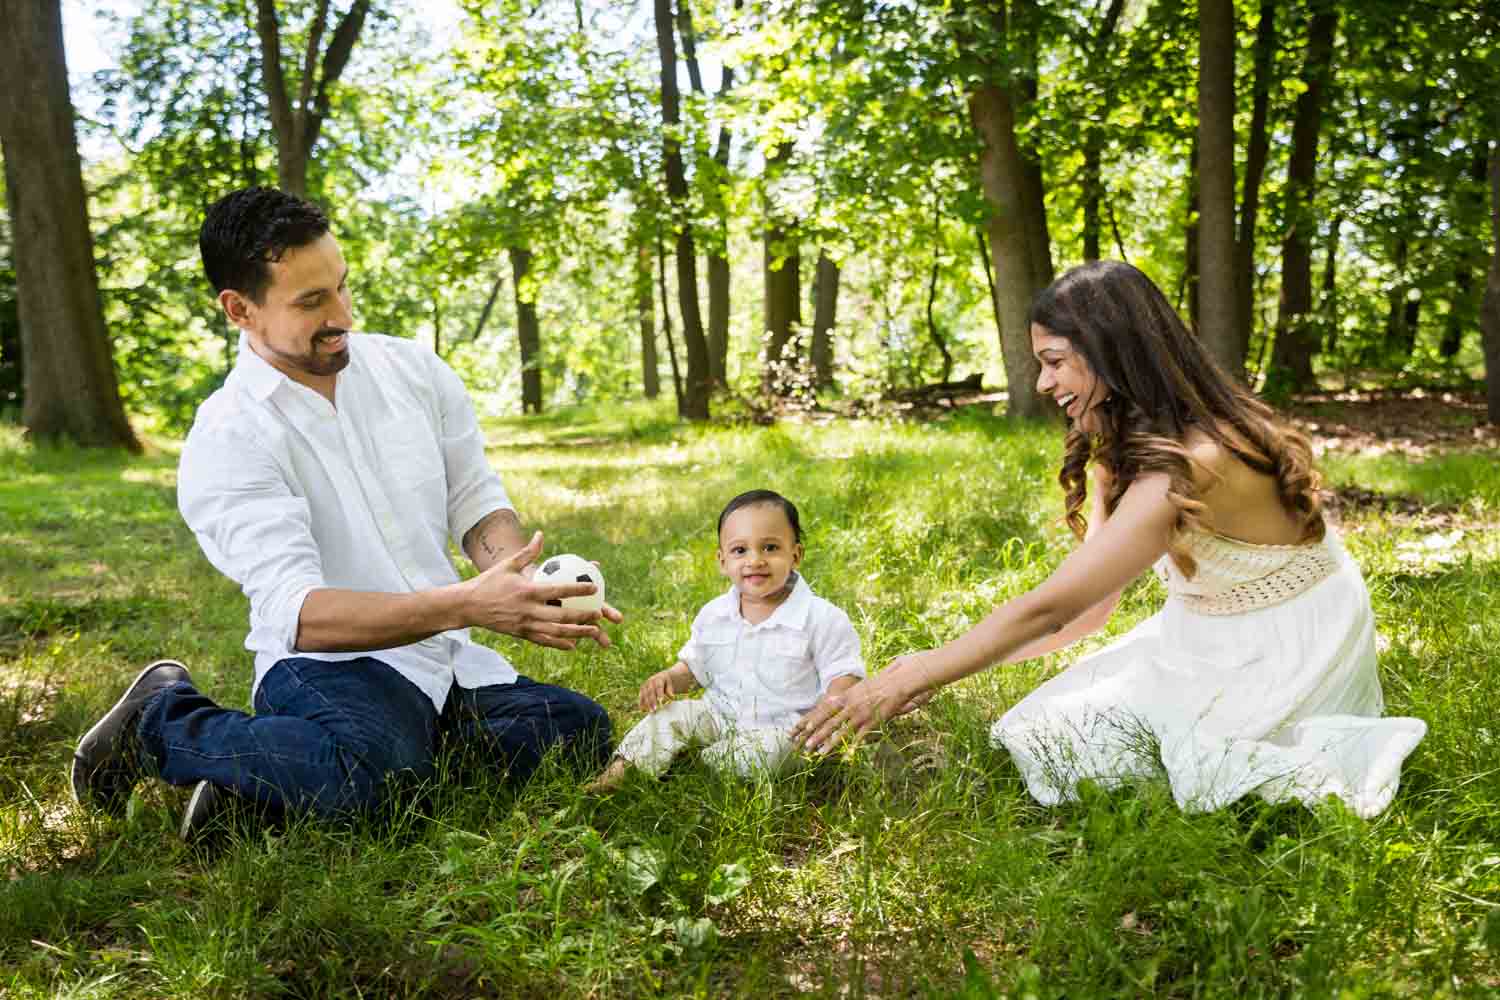 Forest Hills family portrait of parents playing in grass with son